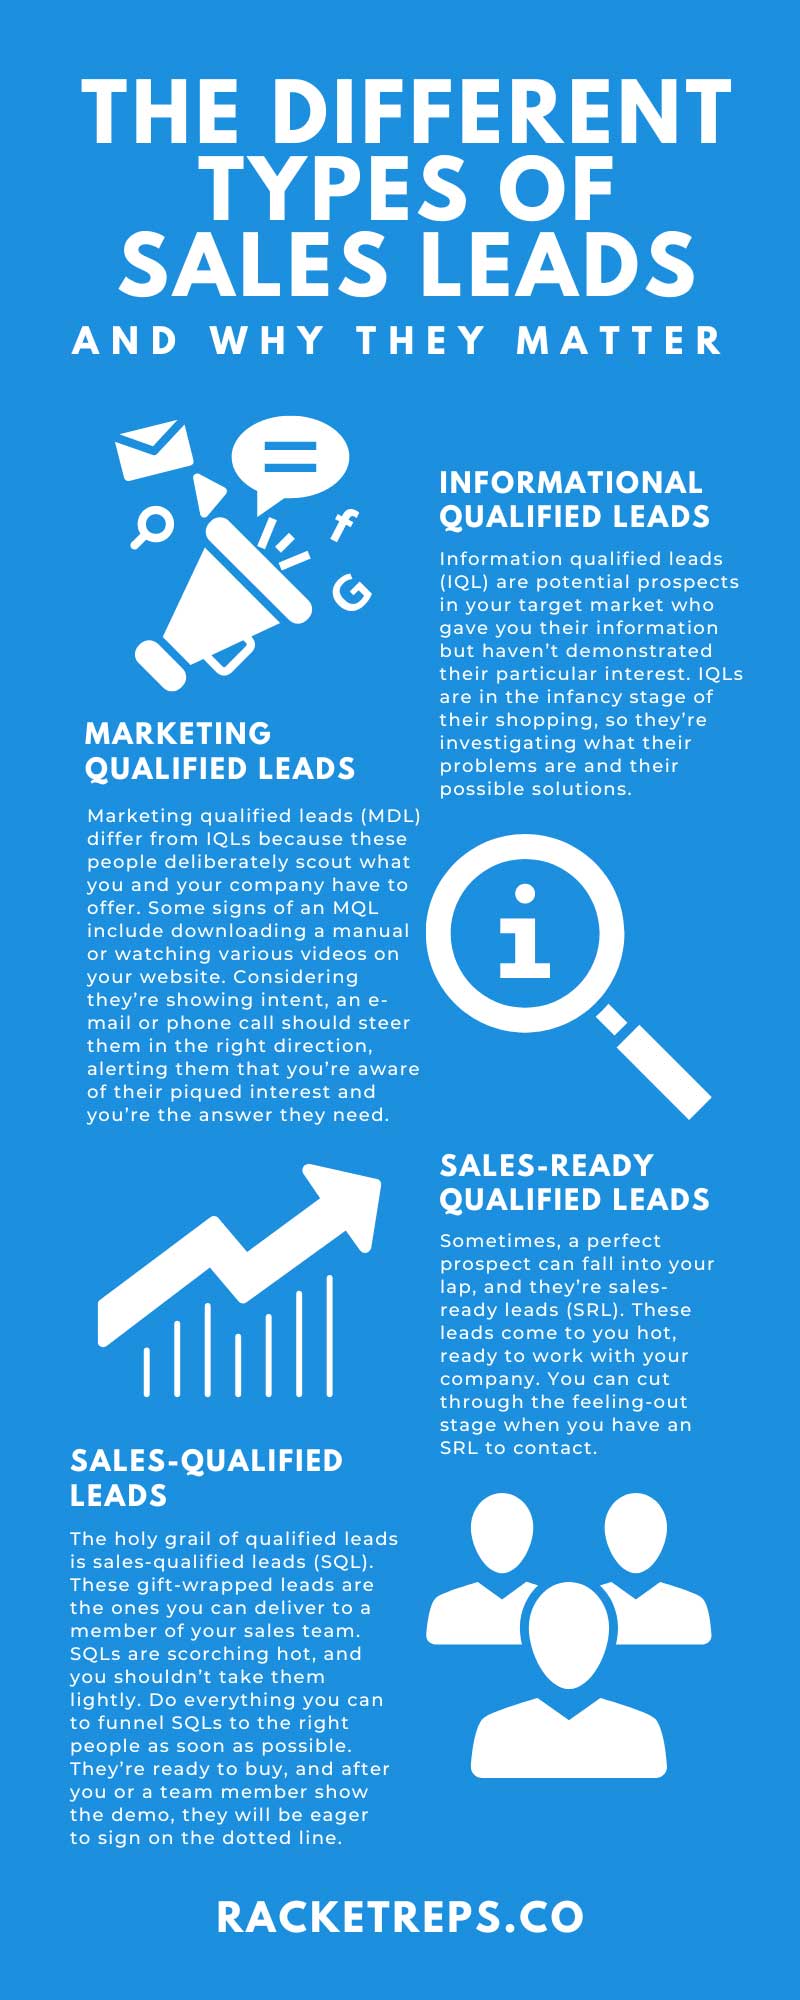 The Different Types of Sales Leads and Why They Matter